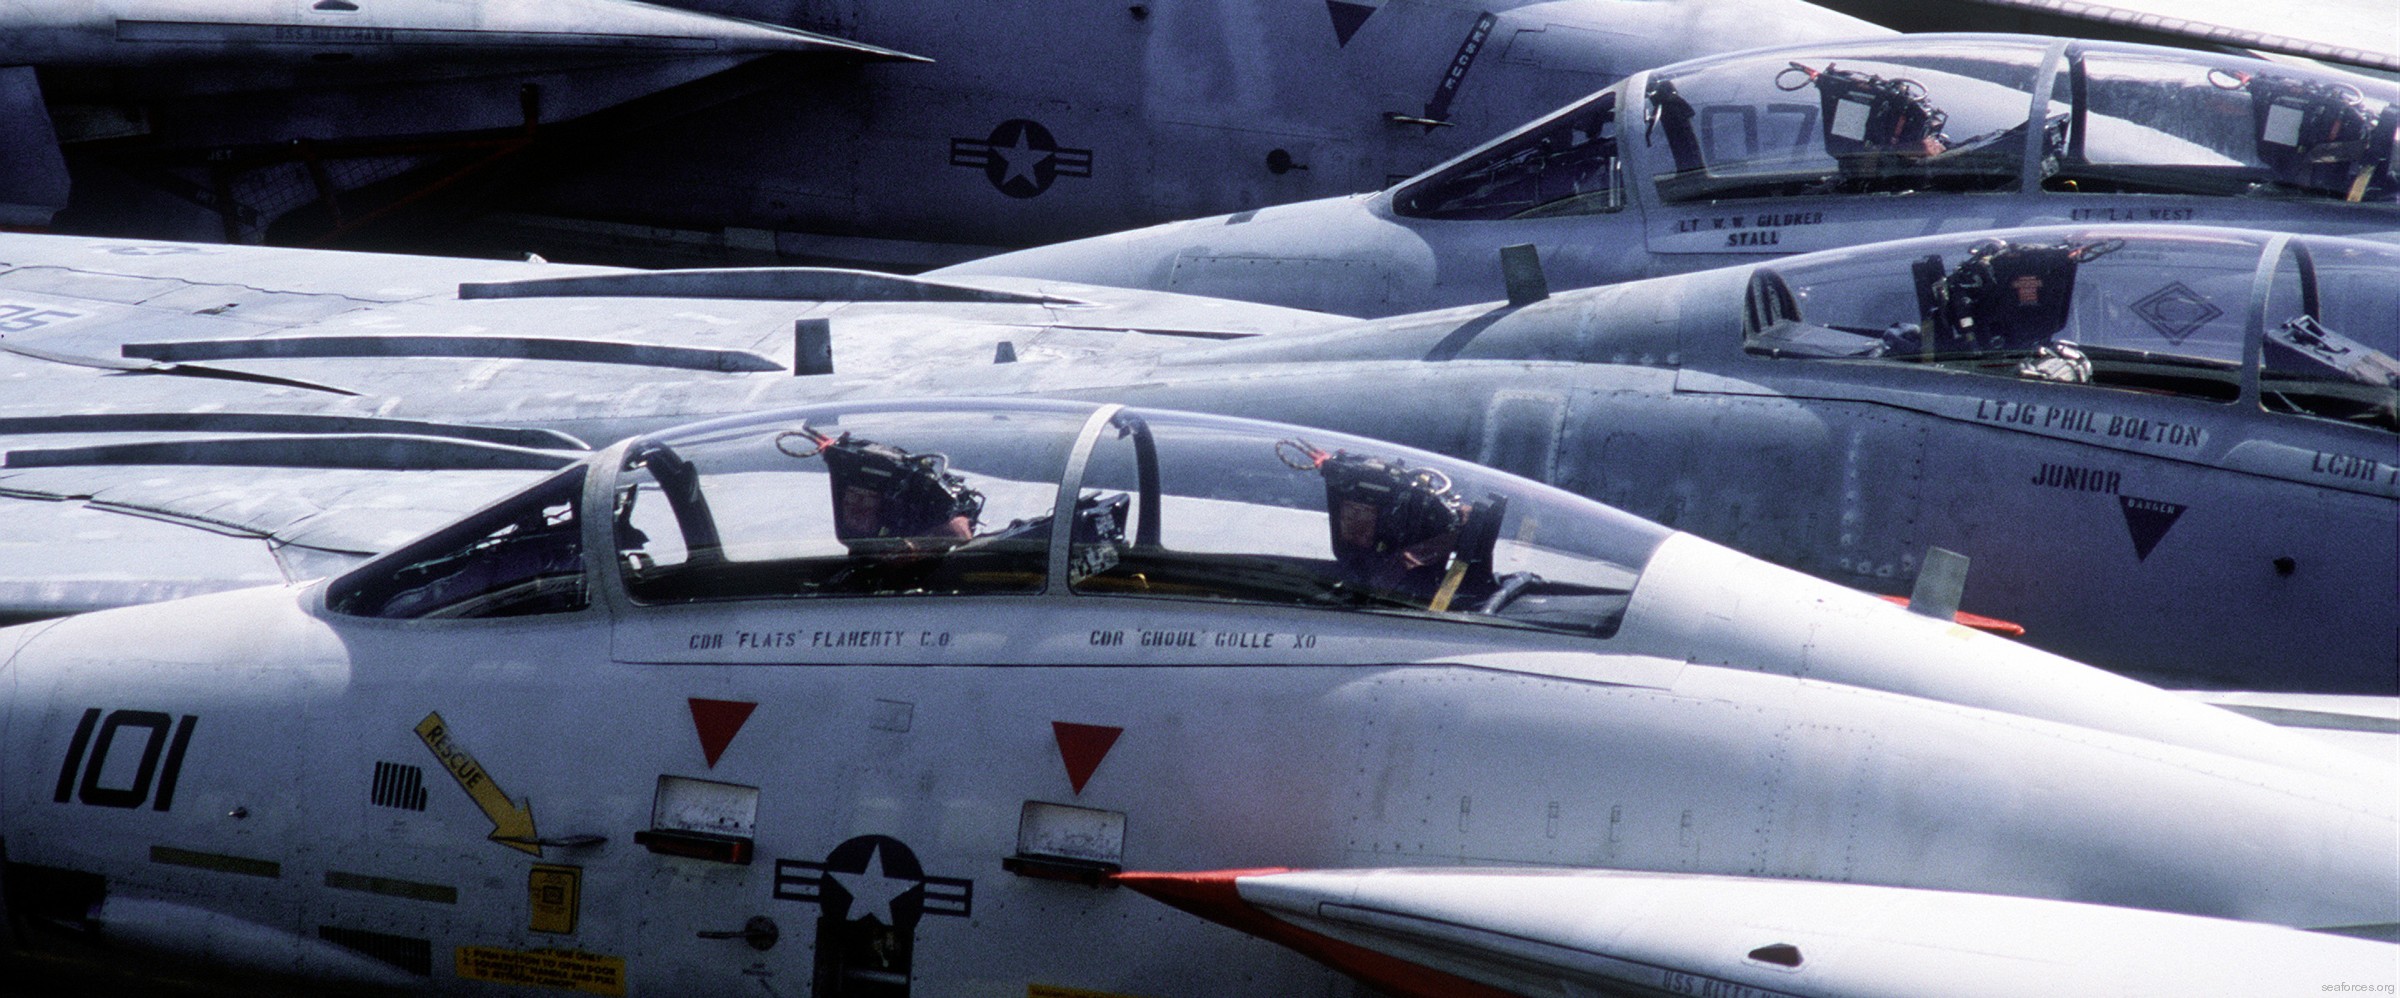 vf-211 fighting checkmates fighter squadron f-14a tomcat us navy carrier air wing cvw-9 uss kitty hawk cv-63 68